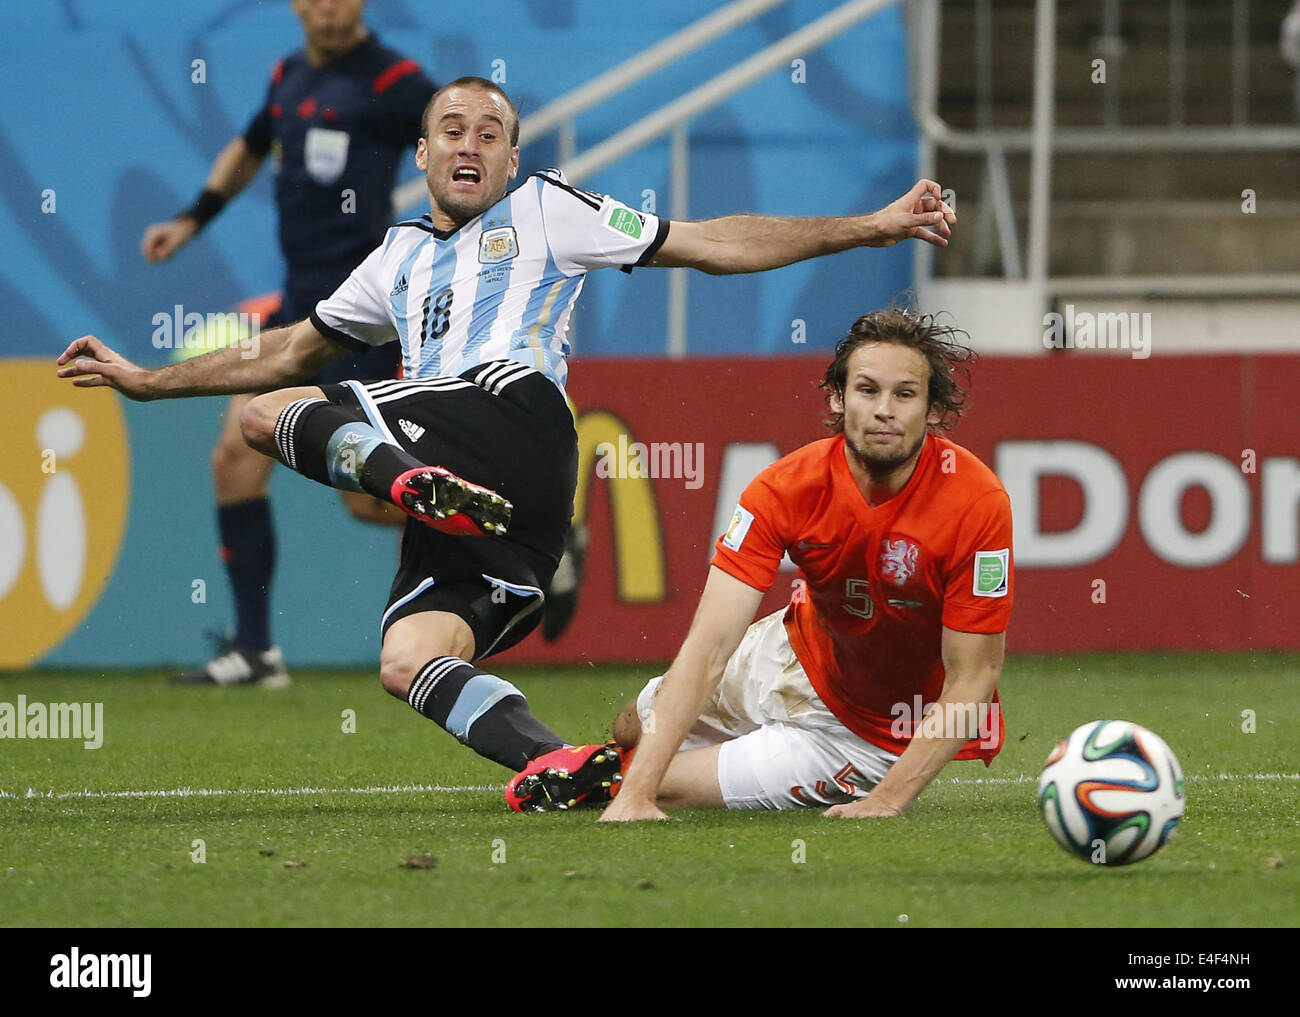 Sao Paulo, Brazil. 9th July, 2014. Argentina's Rodrigo Palacio (L) vies with Netherlands' Daley Blind during a semifinal match between Netherlands and Argentina of 2014 FIFA World Cup at the Arena de Sao Paulo Stadium in Sao Paulo, Brazil, on July 9, 2014. Argentina won 4-2 on penalties over Netherlands after a 0-0 tie and qualified for the final on Wednesday. Credit:  Zhou Lei/Xinhua/Alamy Live News Stock Photo